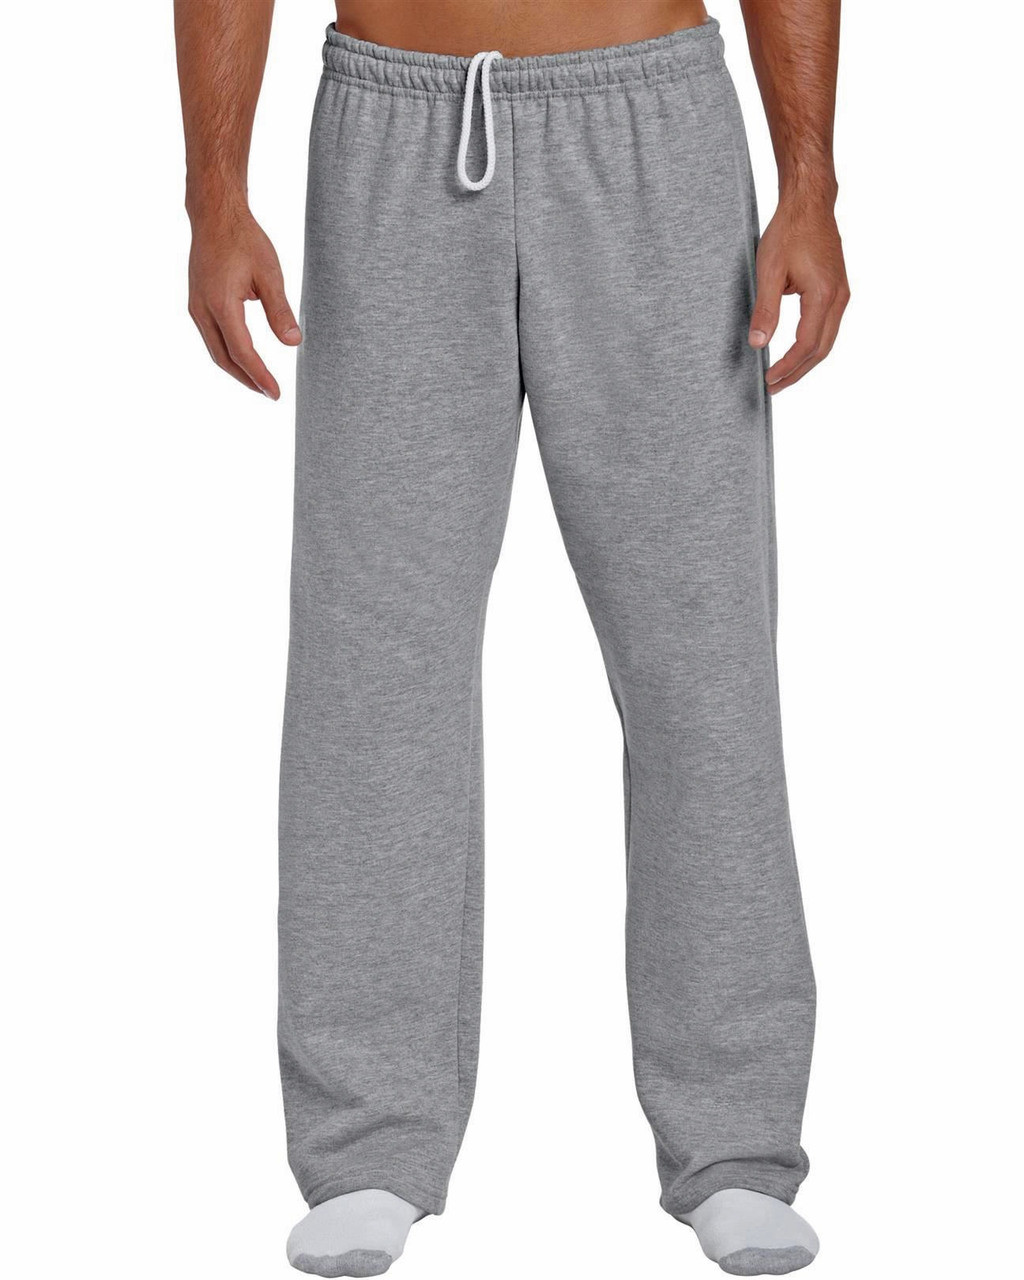 Sweatpants with non-elastic ankles